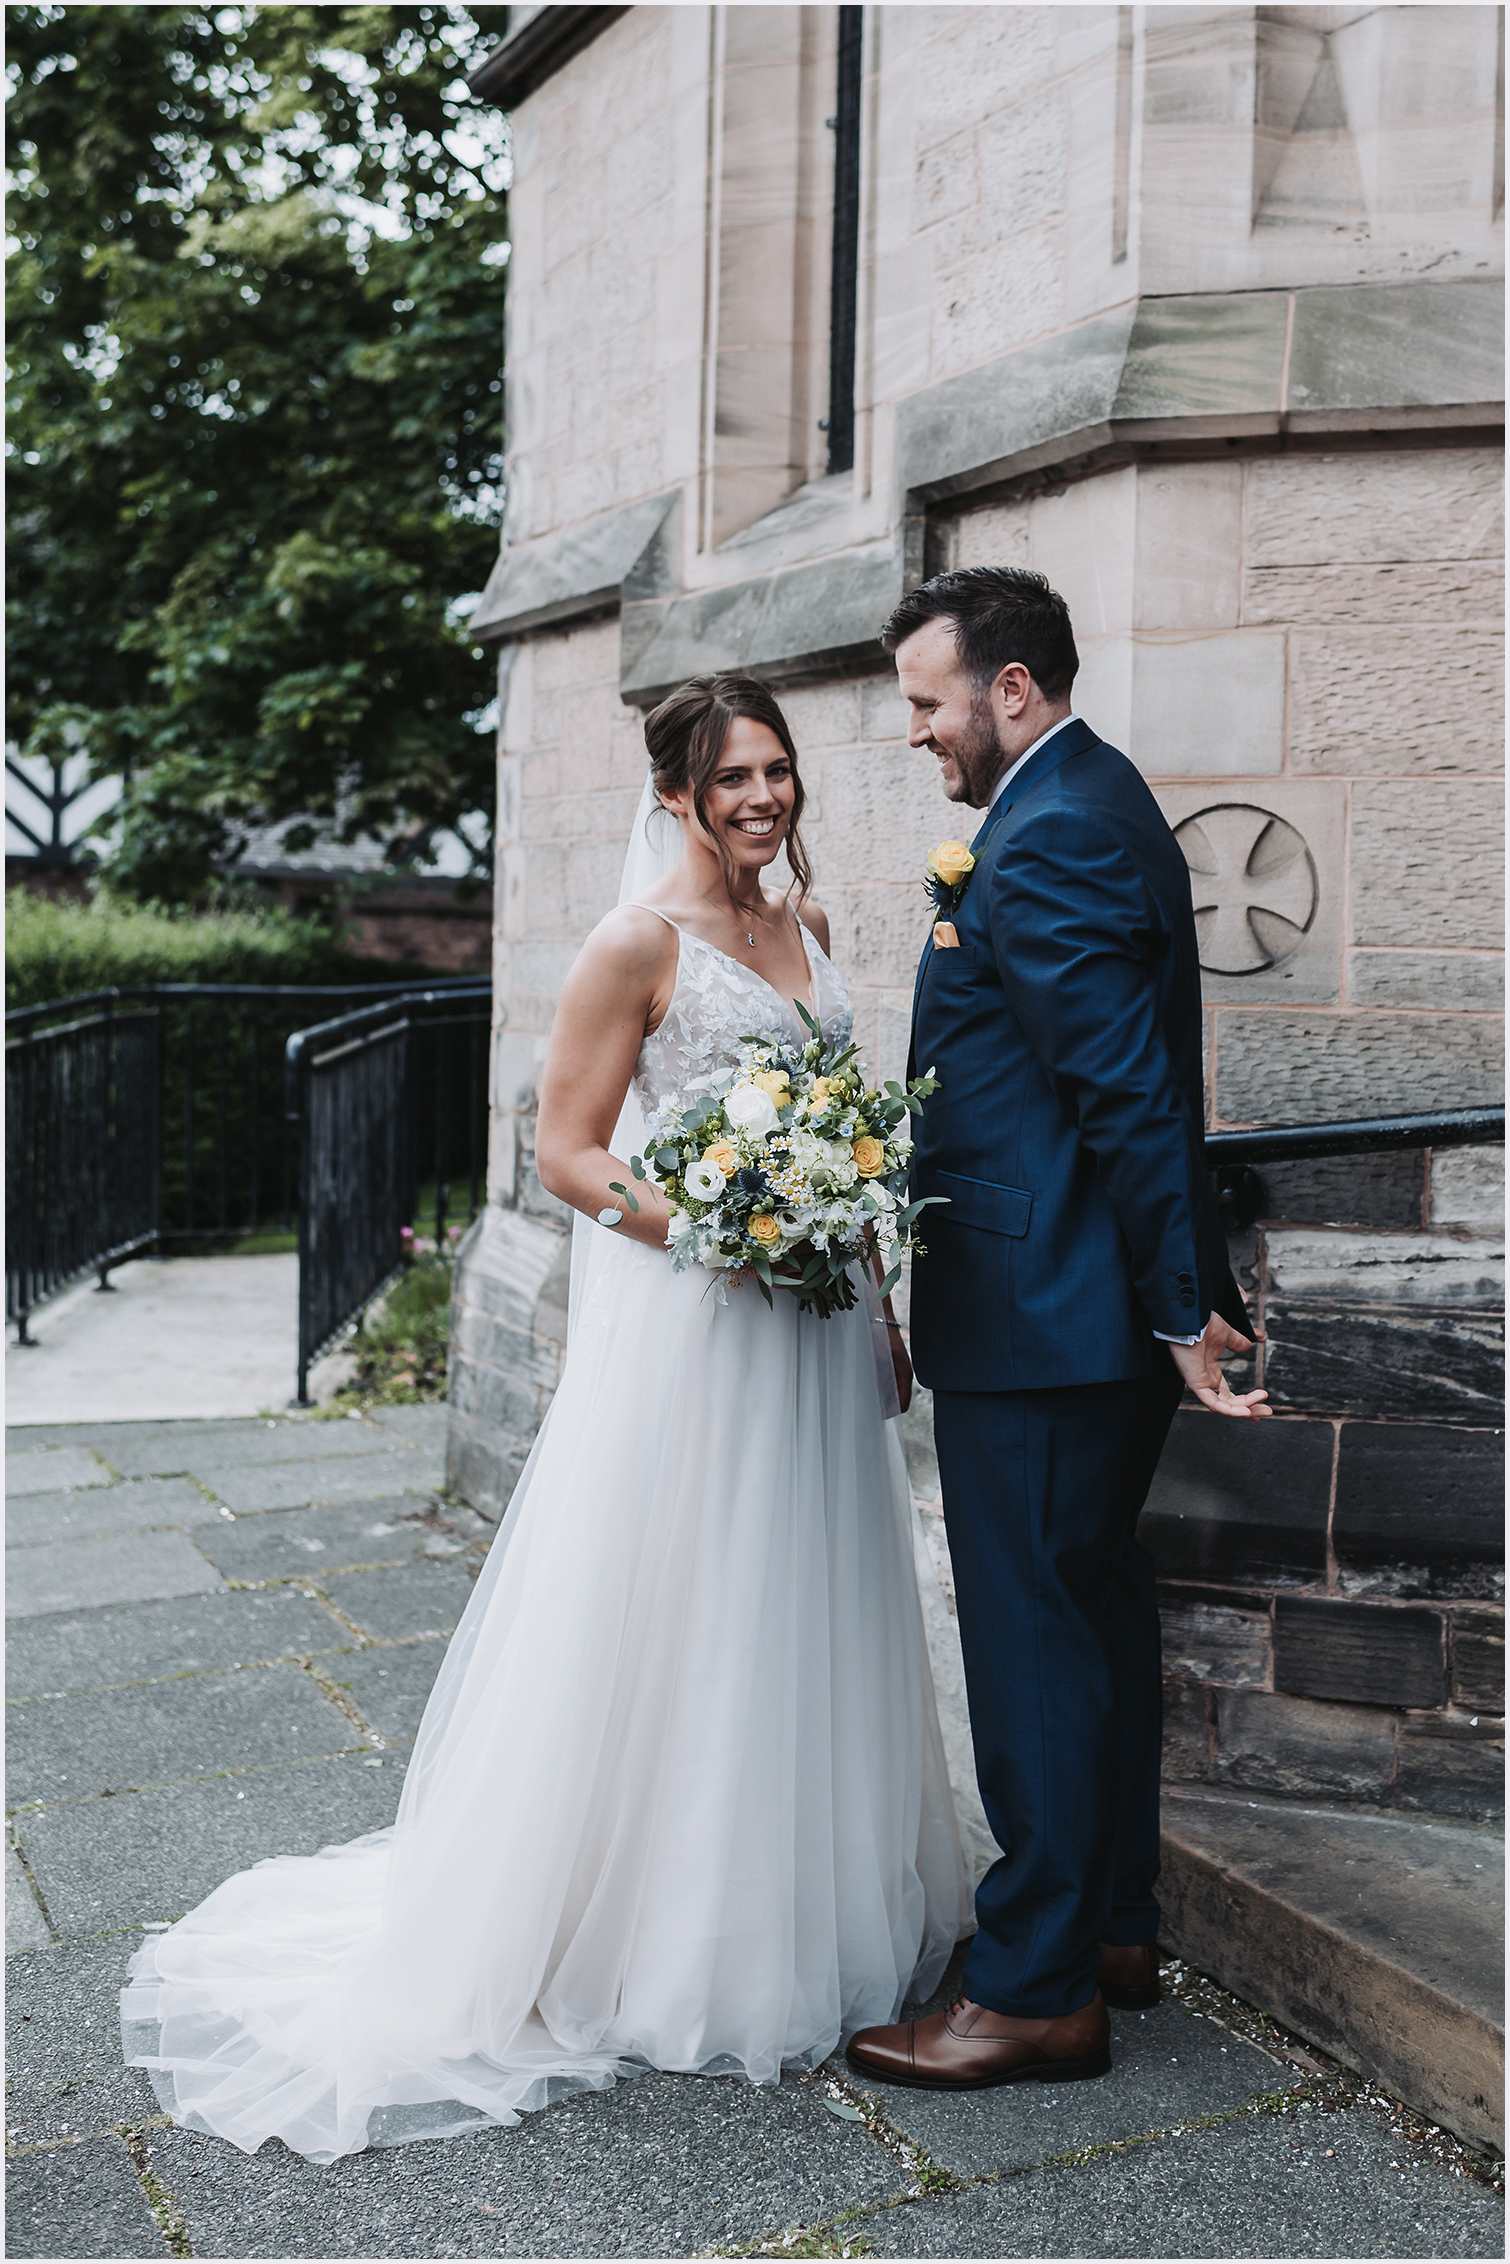 A bride smiles at the camera while her new husband smiles at her outside the church where they have just got married.  Image captured by Helena Jayne Photography.  A wedding photographer covering Cheshire and north Wales